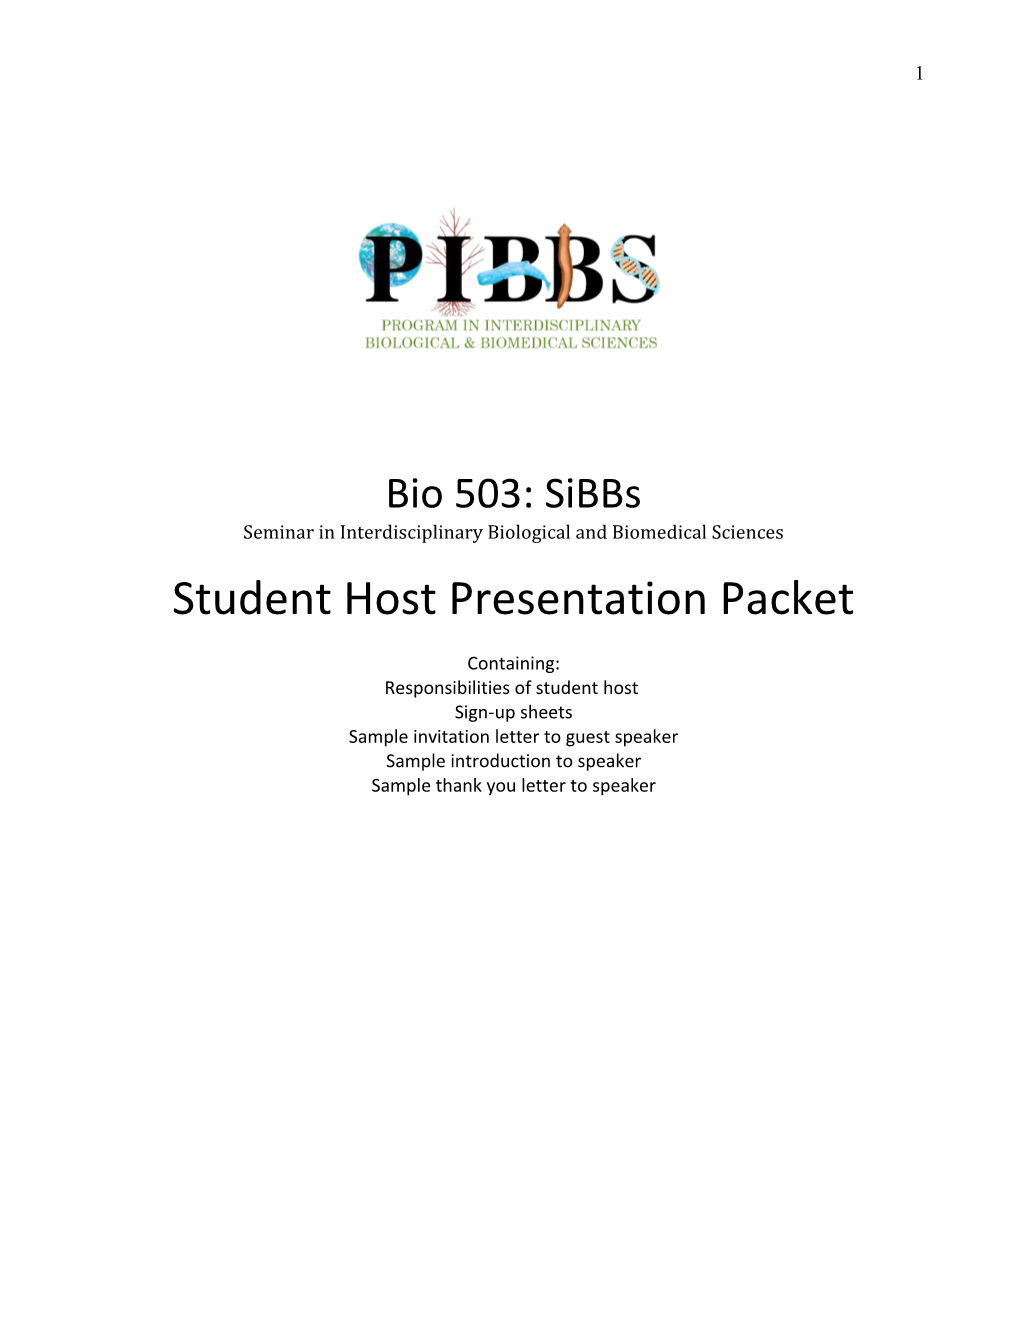 Cover Sheet Listing Responsibilities of Student Host in Order